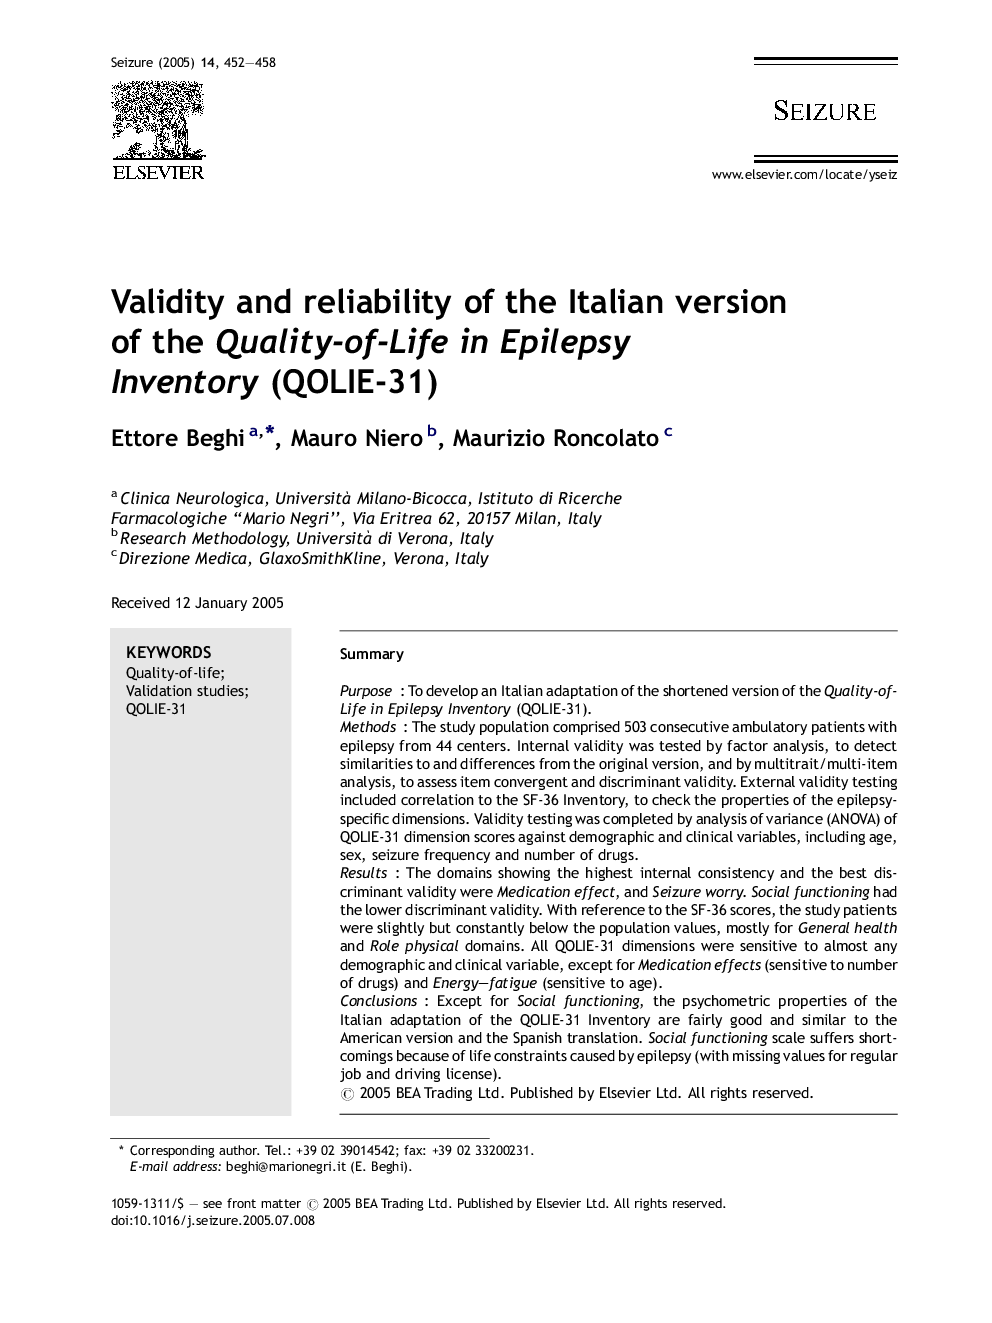 Validity and reliability of the Italian version of the Quality-of-Life in Epilepsy Inventory (QOLIE-31)